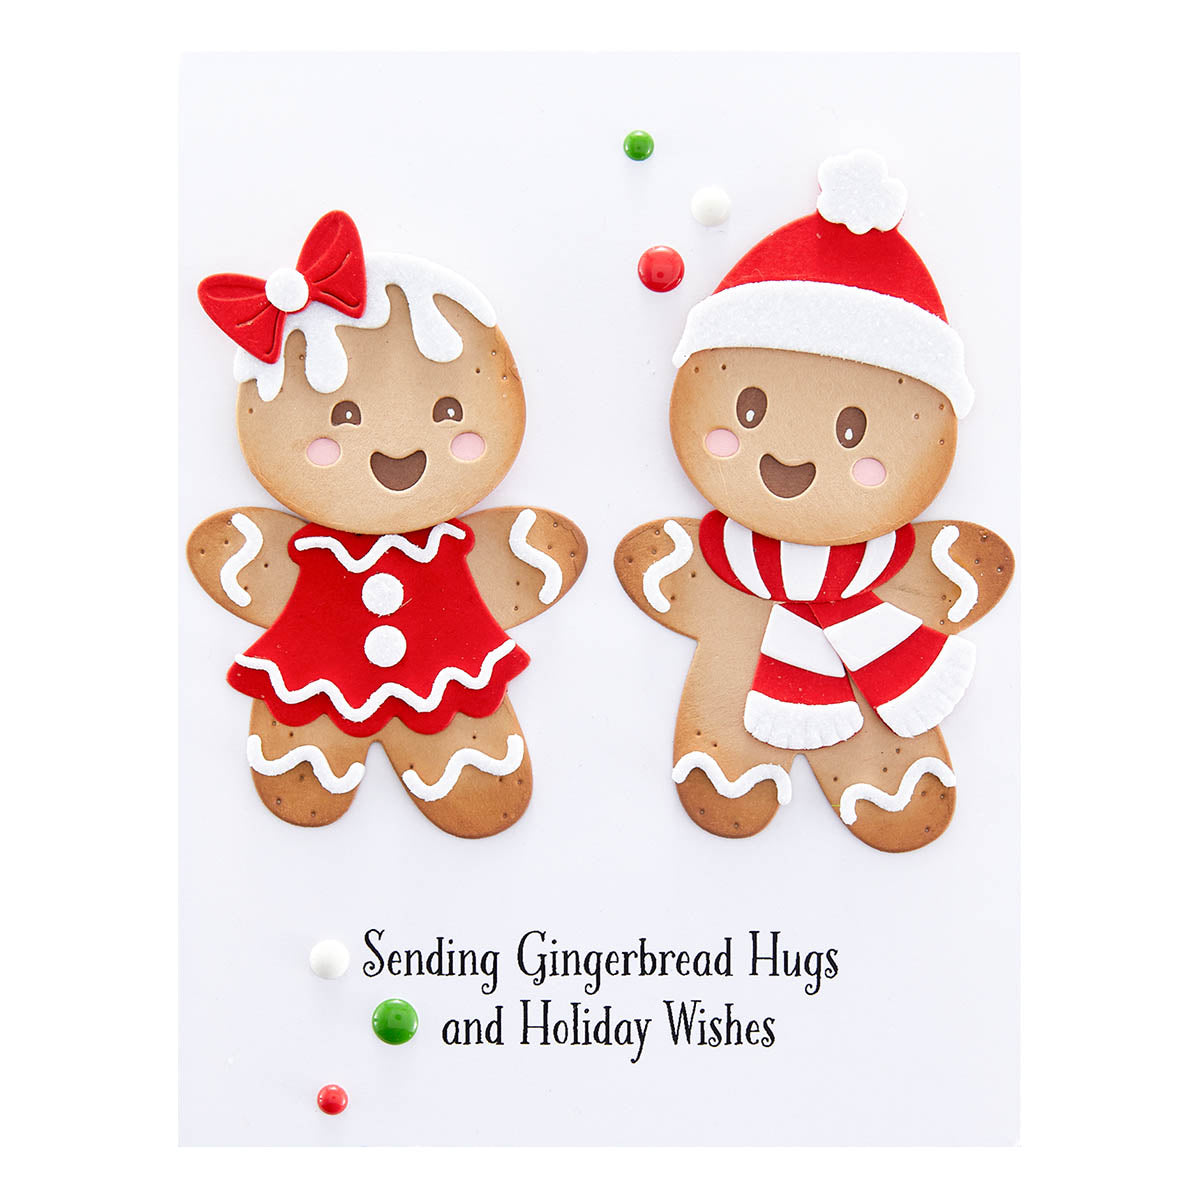 Spellbinders - Dancin' Christmas Sentiments Clear Stamp Set from the Dancin' Christmas Collection